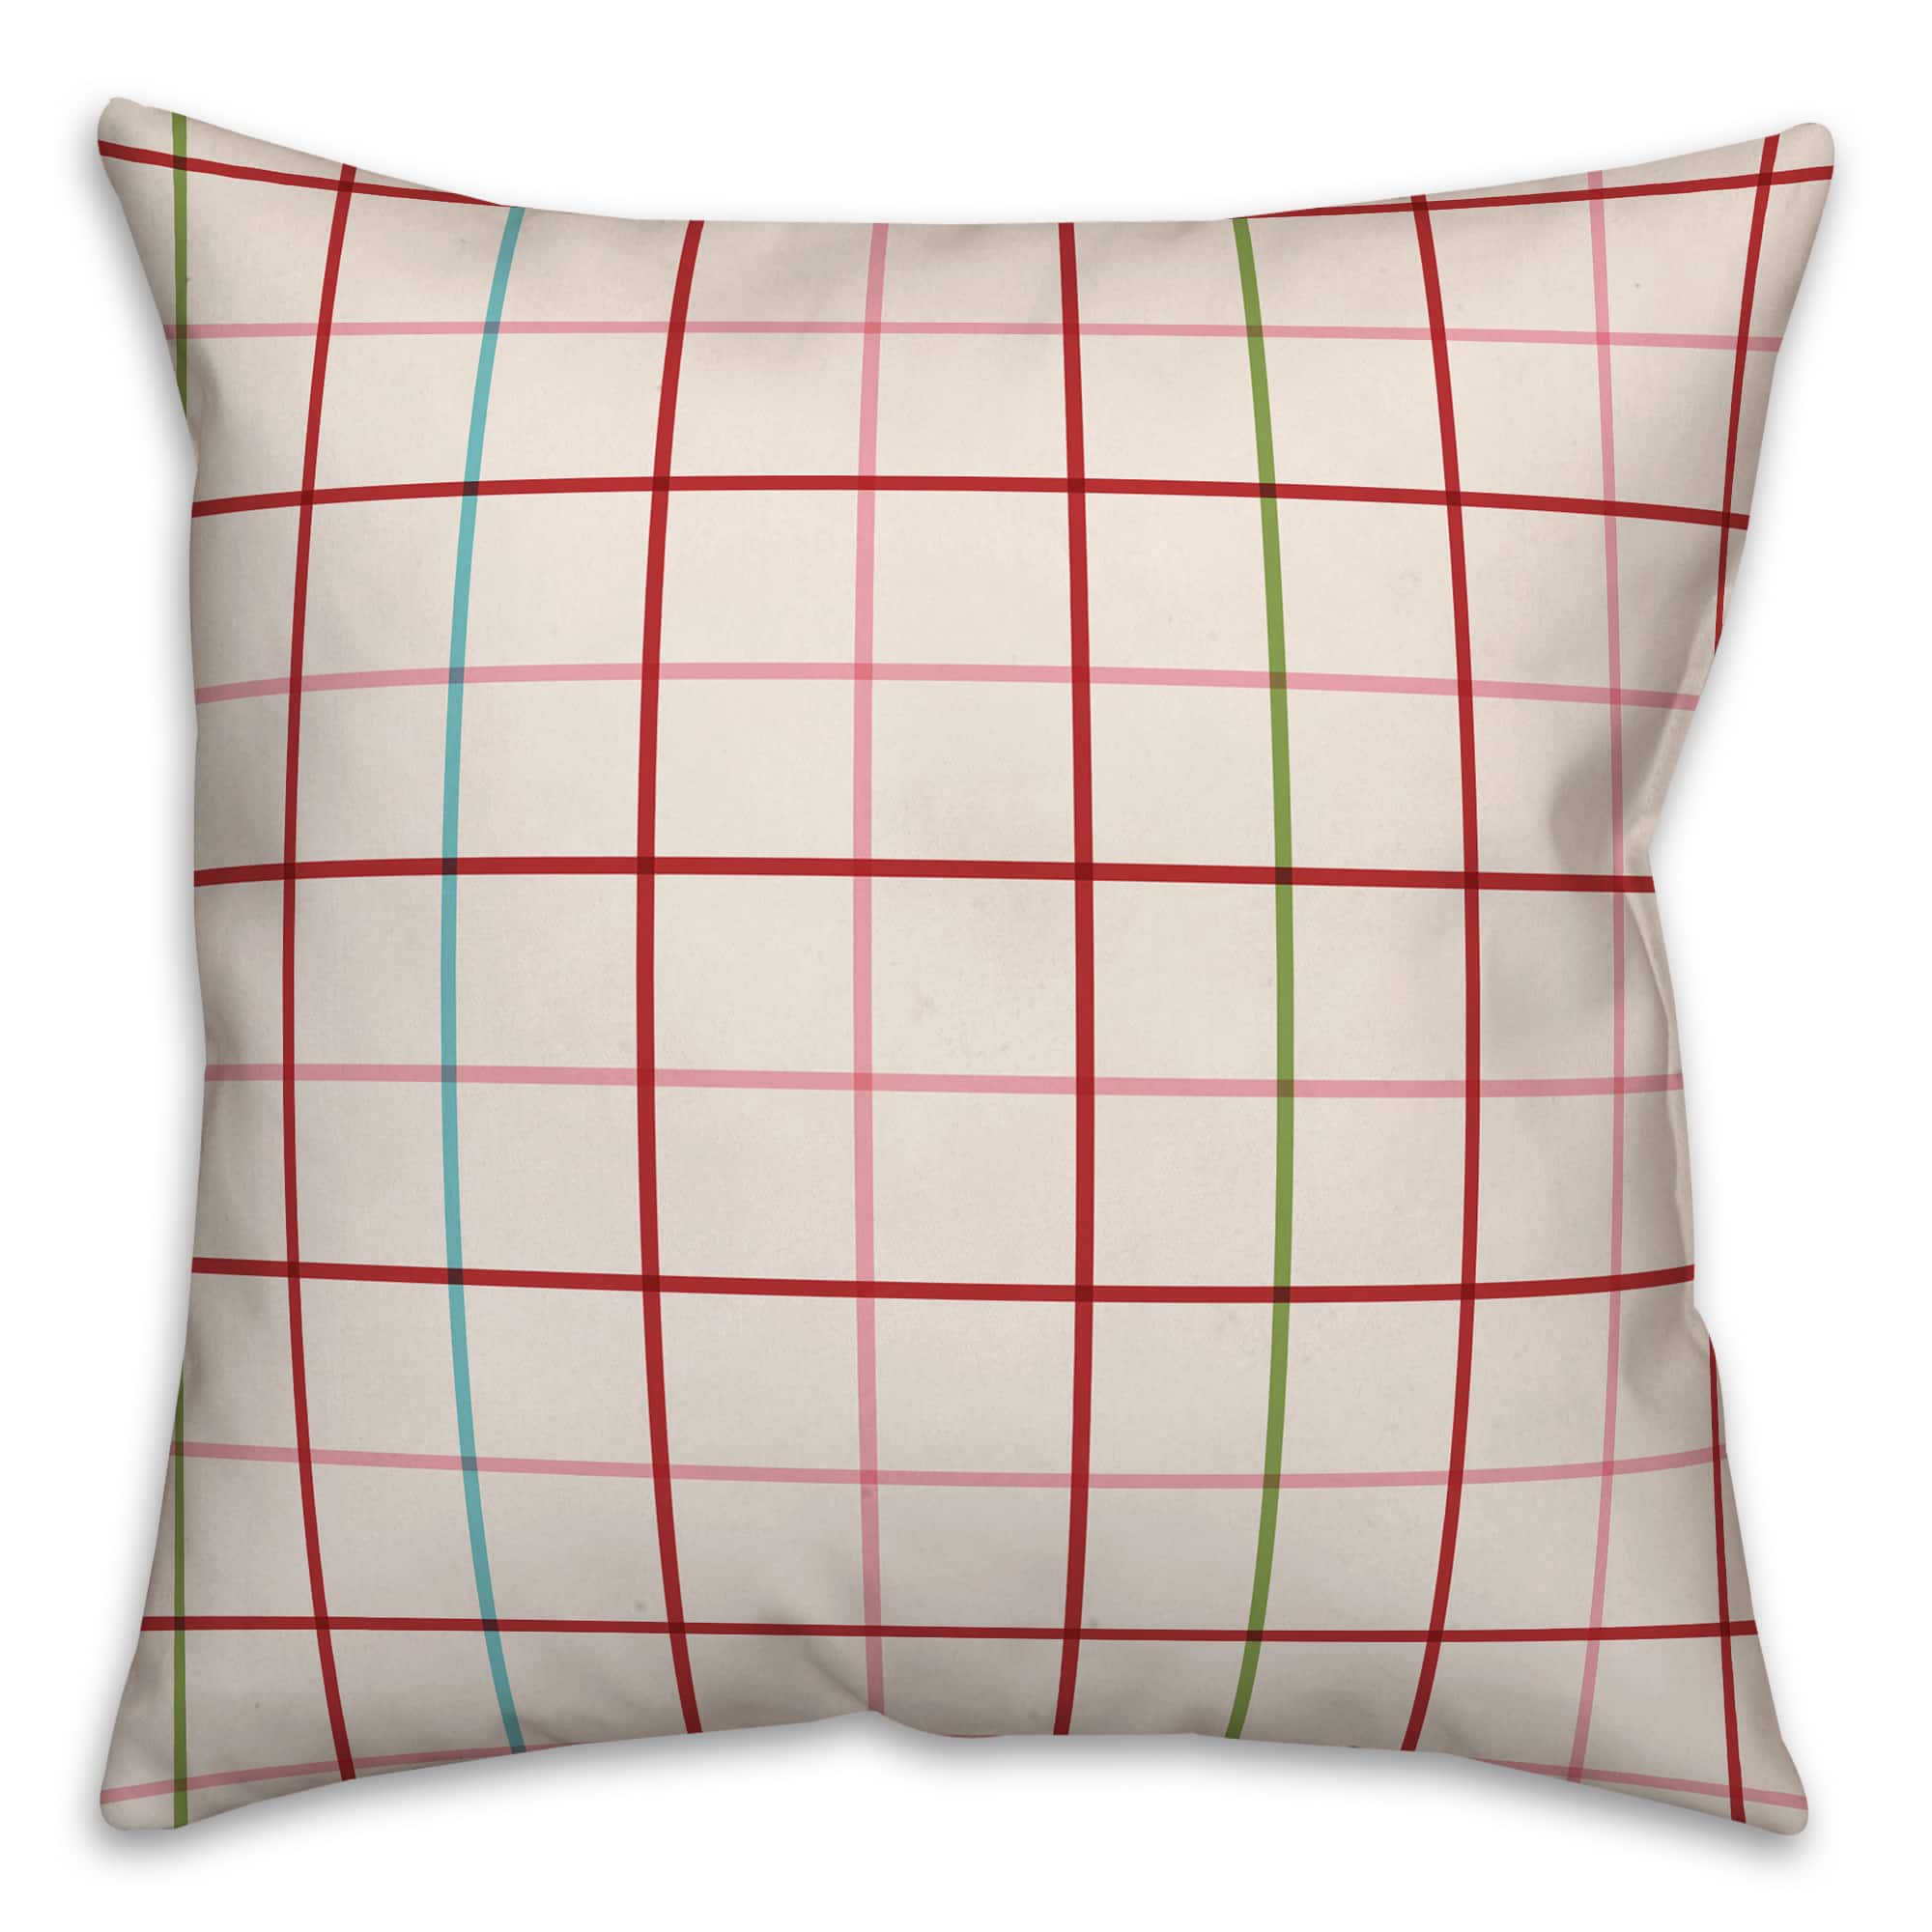 Thin Colorful Grid 18x18 Throw Pillow